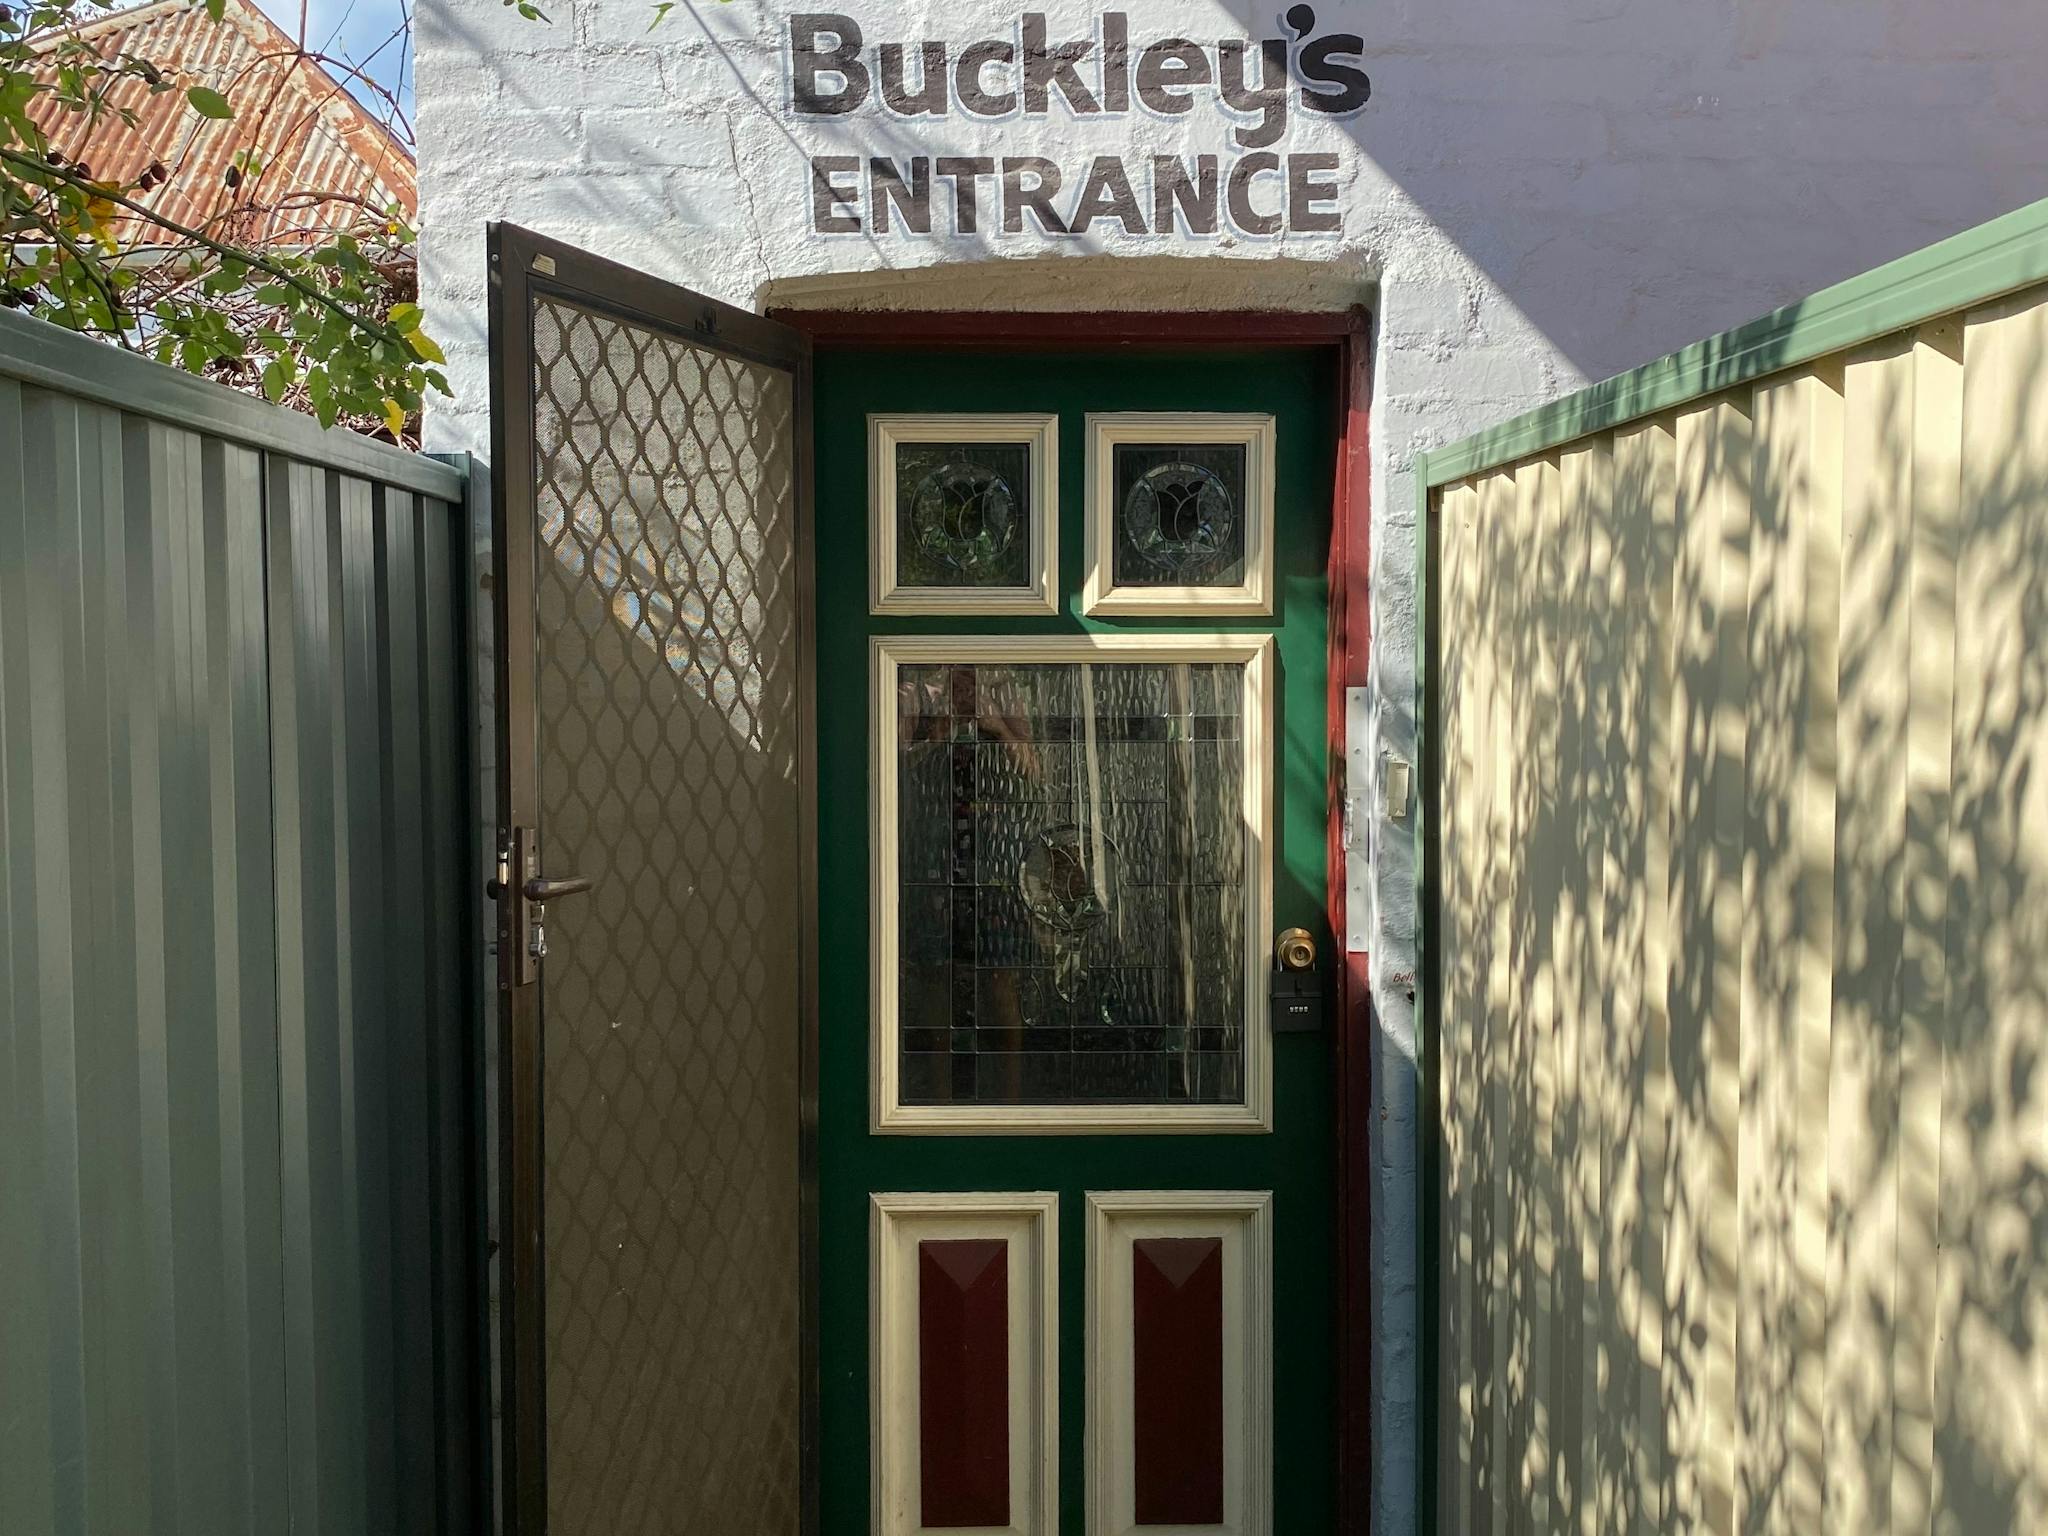 Welcome to Bright Coworking at Buckley's. Access is from the rear of the building through this door.